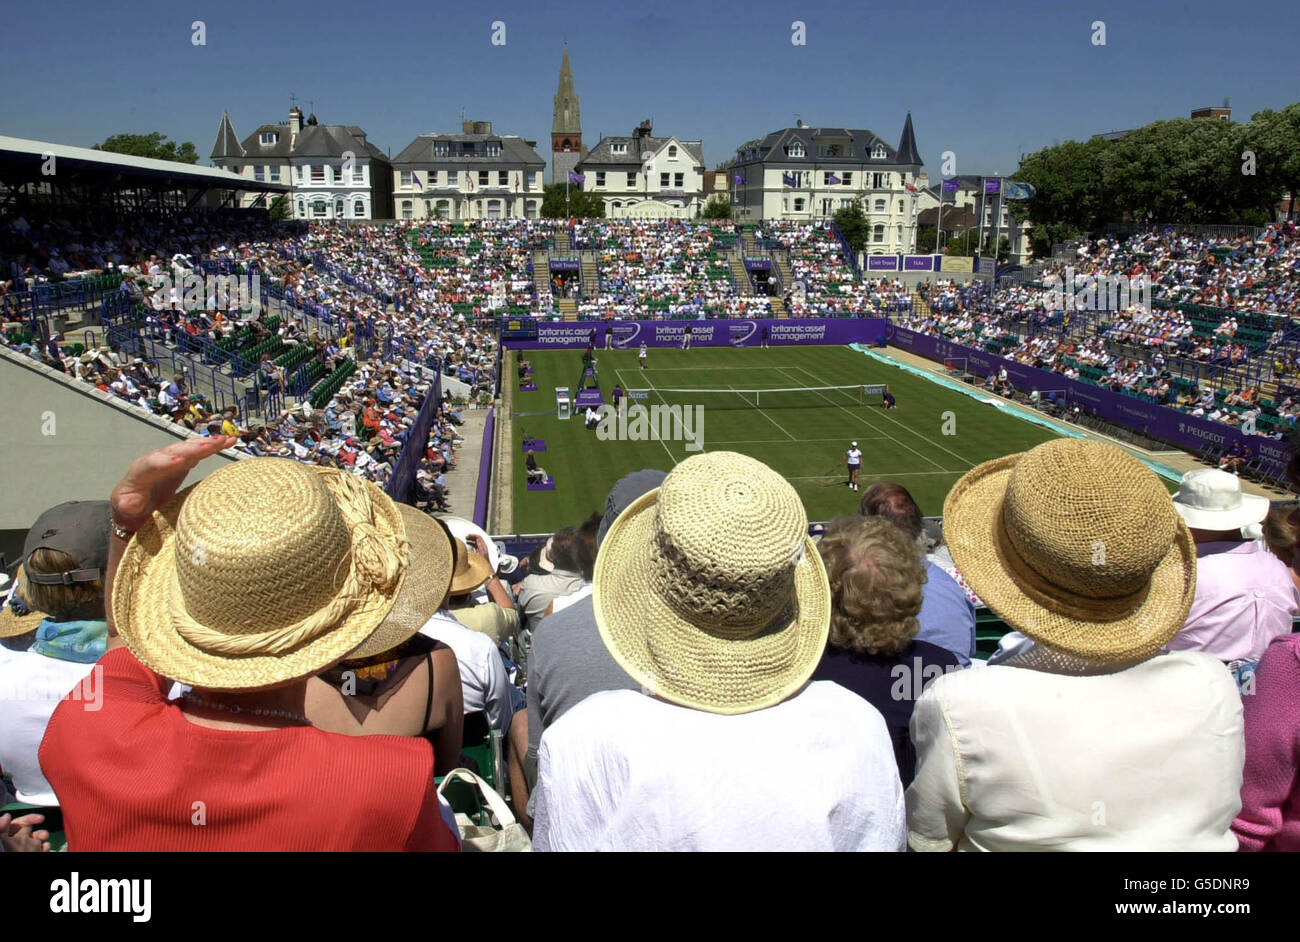 Tennis supporters sit in the sunshine as they watch the action in the Britannic Asset Management International Championships at Eastbourne, 2001. The tennis tournament is part of the build up to next weeks Lawn Tennis Championships at Wimbledon. Stock Photo